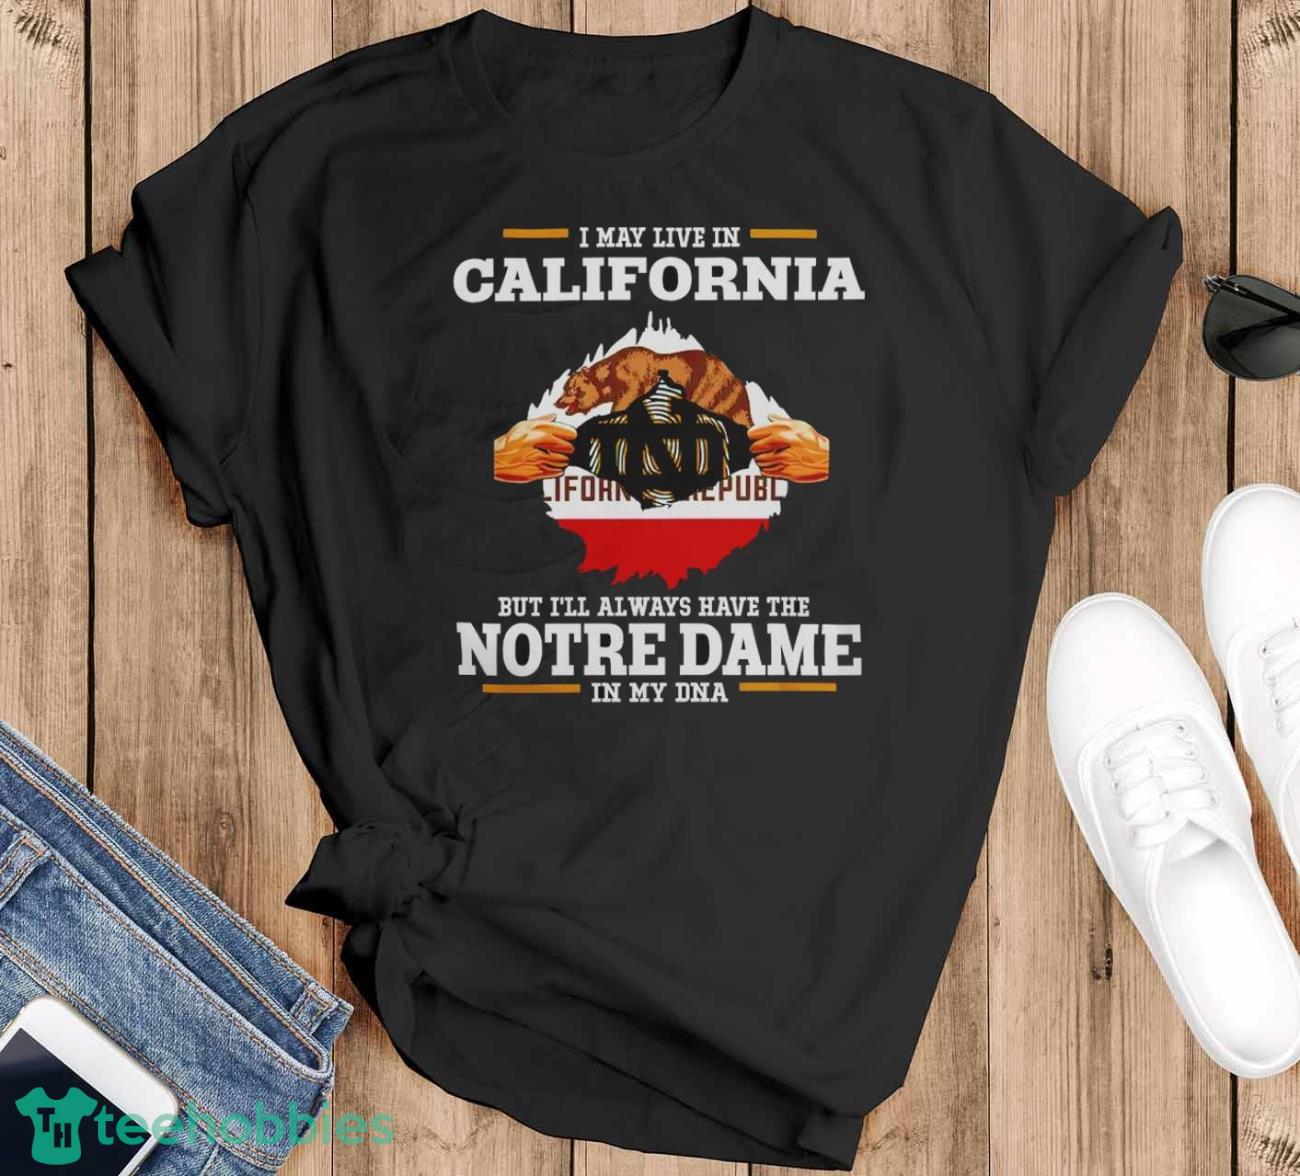 I May Live In California But I’ll Always Have The Notre Dame Fighting Irish In My Dna 2023 shirt - Black T-Shirt